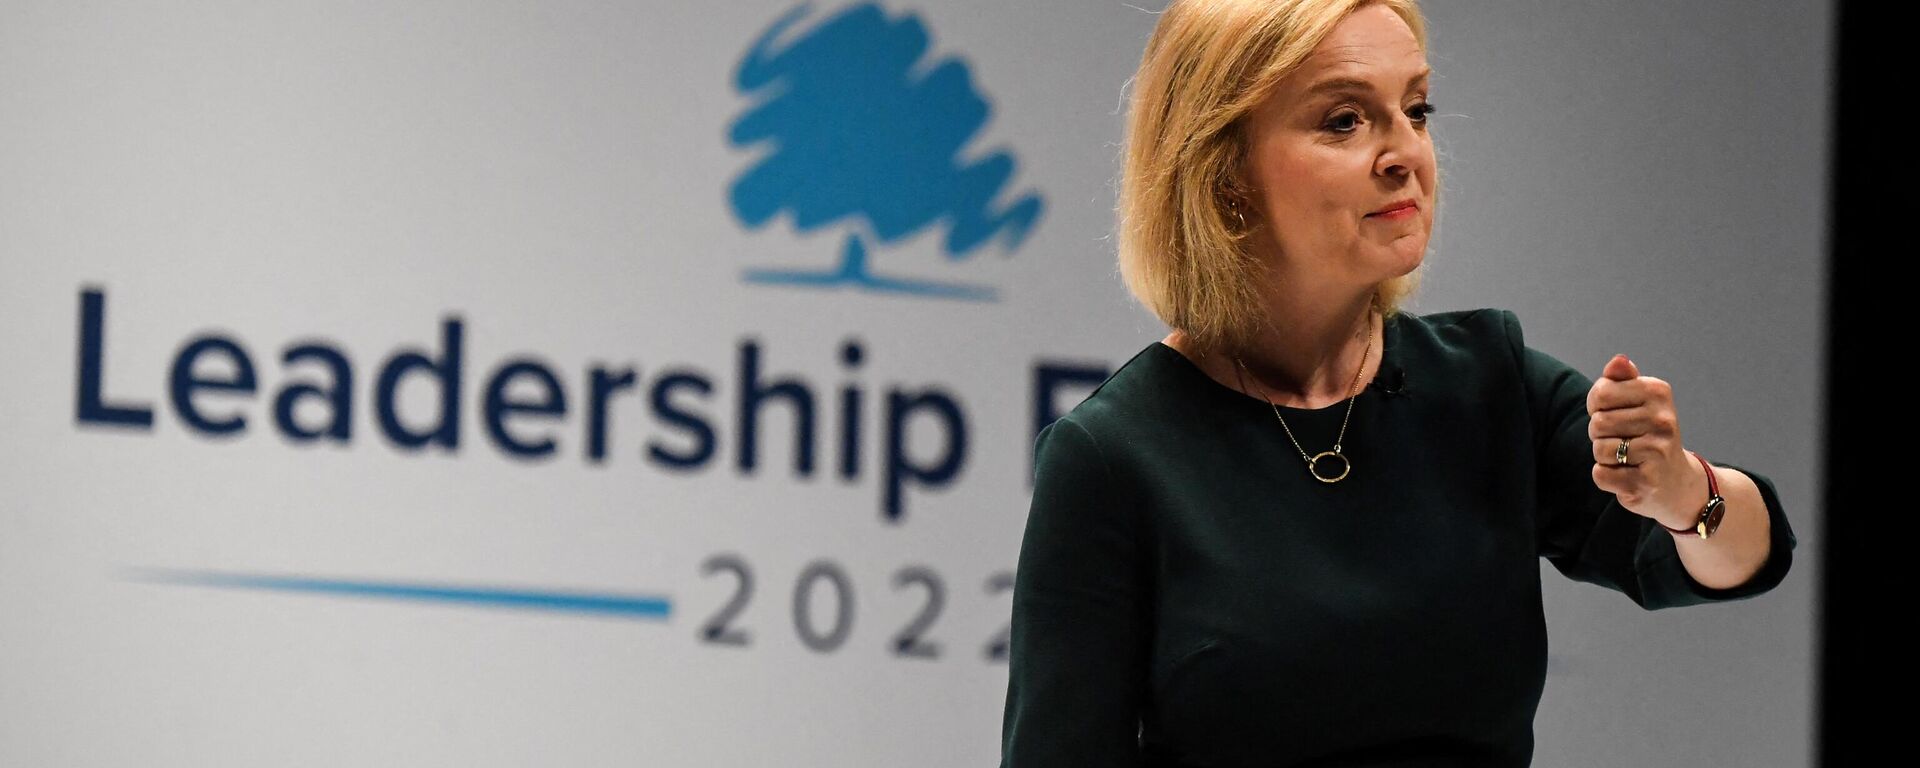 Contender to become the country's next Prime minister and leader of the Conservative party British Foreign Secretary Liz Truss speaks during a Conservative Party Hustings event in Perth, on August 16, 2022 - Sputnik International, 1920, 05.09.2022